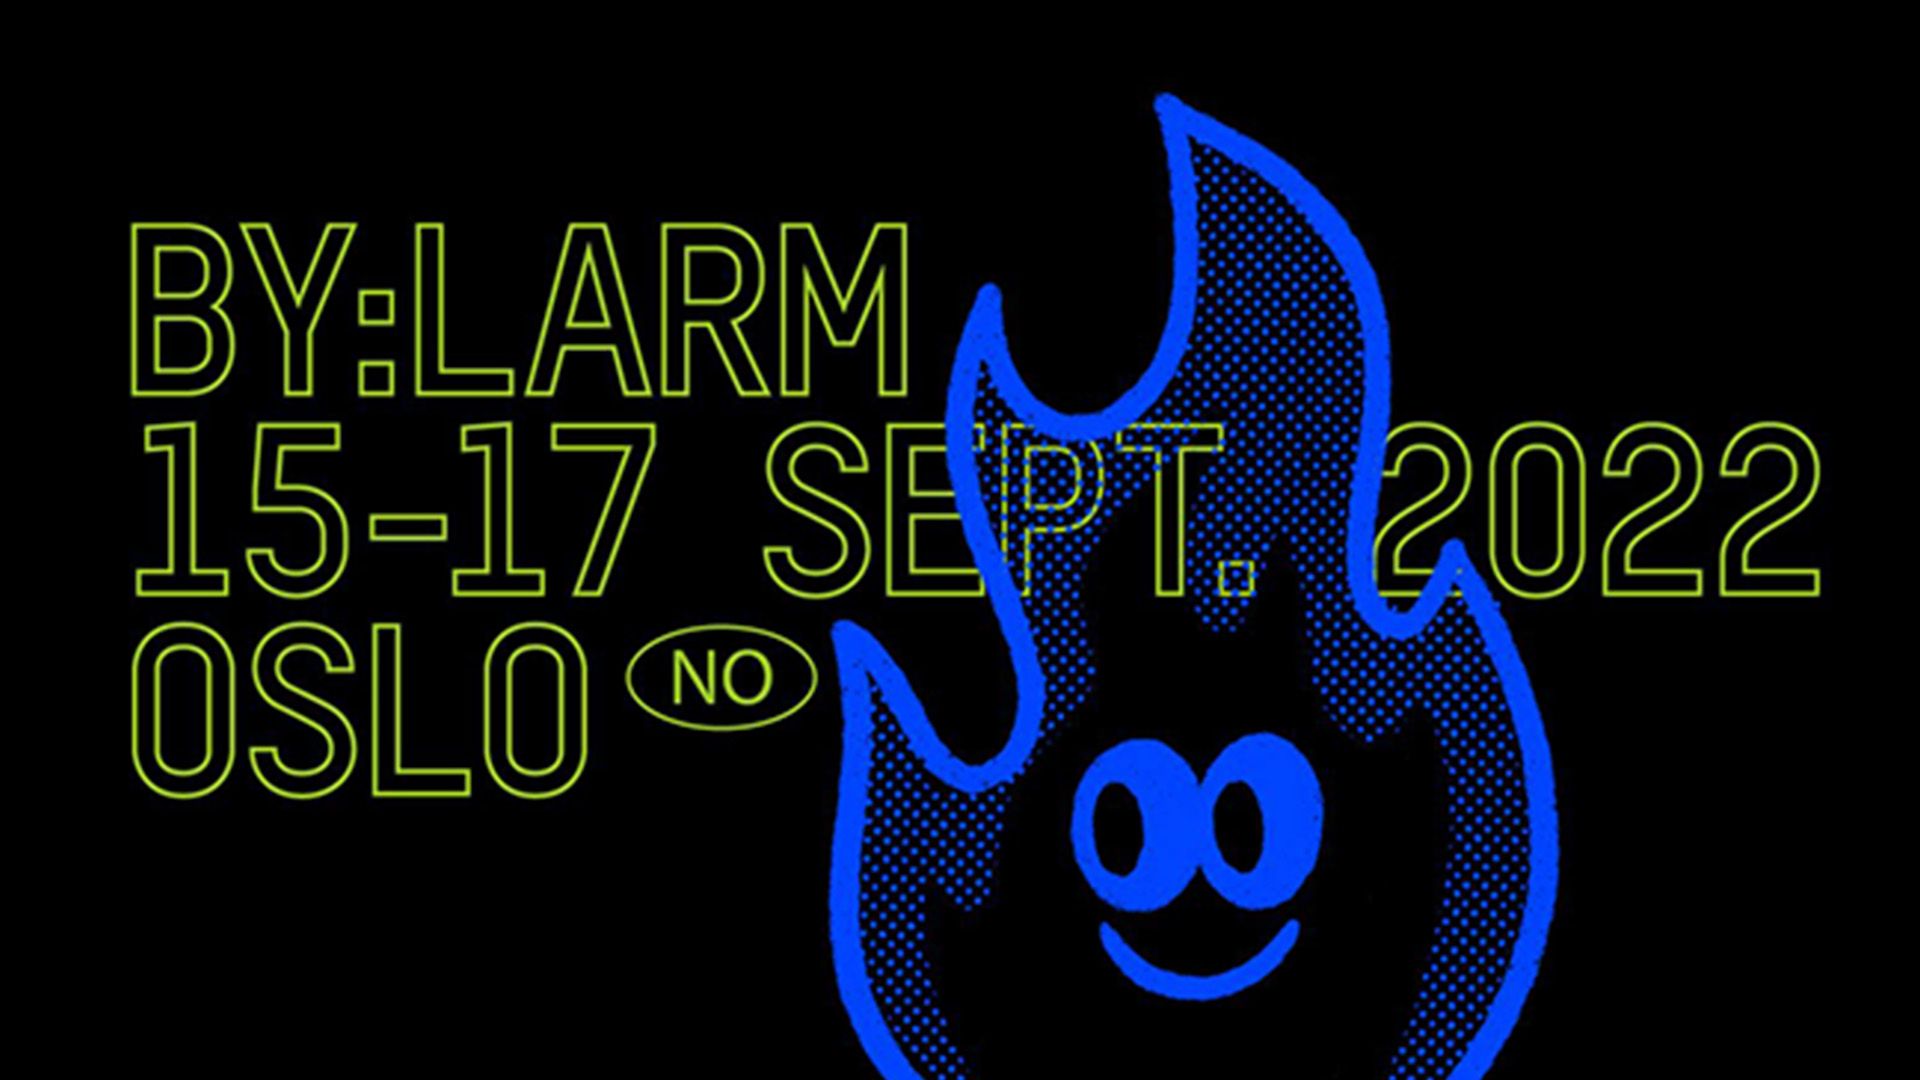 Cover Image for We are at the by:Larm Festival in Oslo!